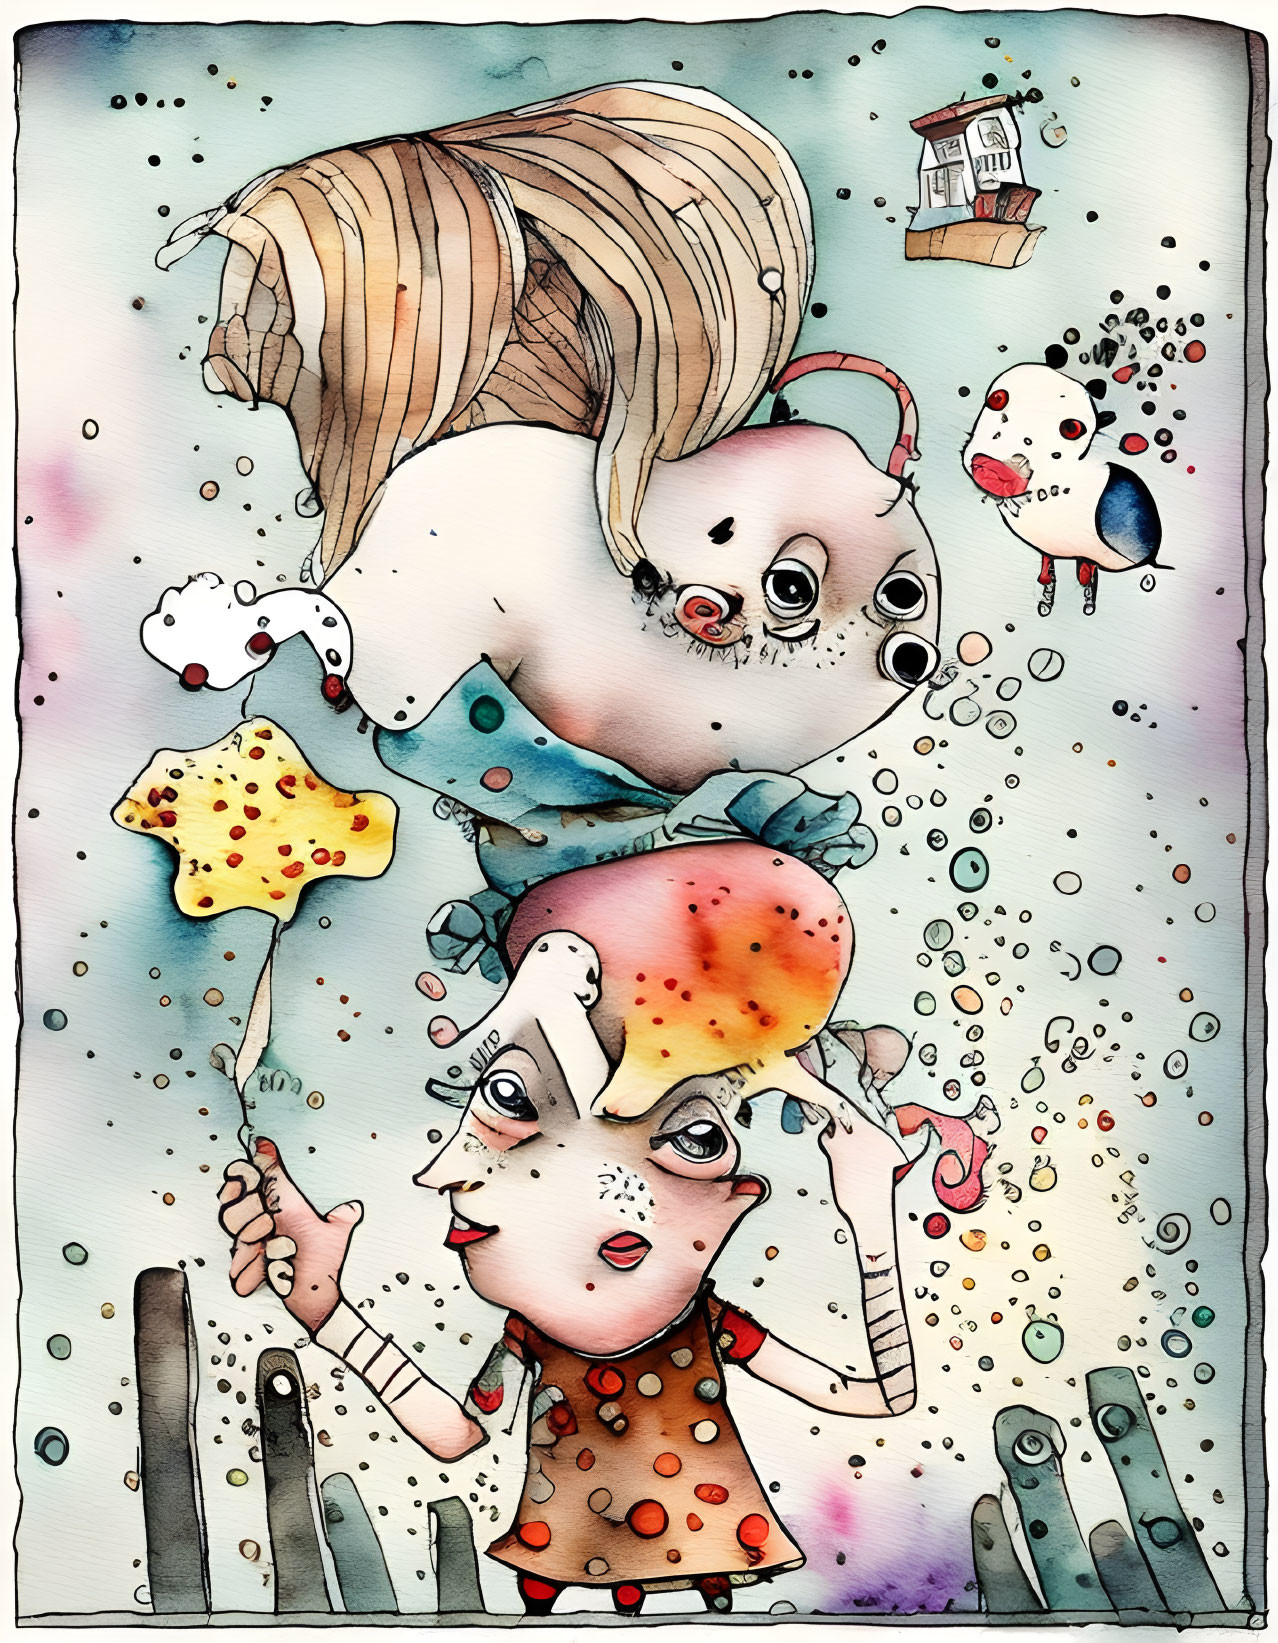 Colorful Watercolor Illustration: Girl Underwater with Sea Creatures and Floating House